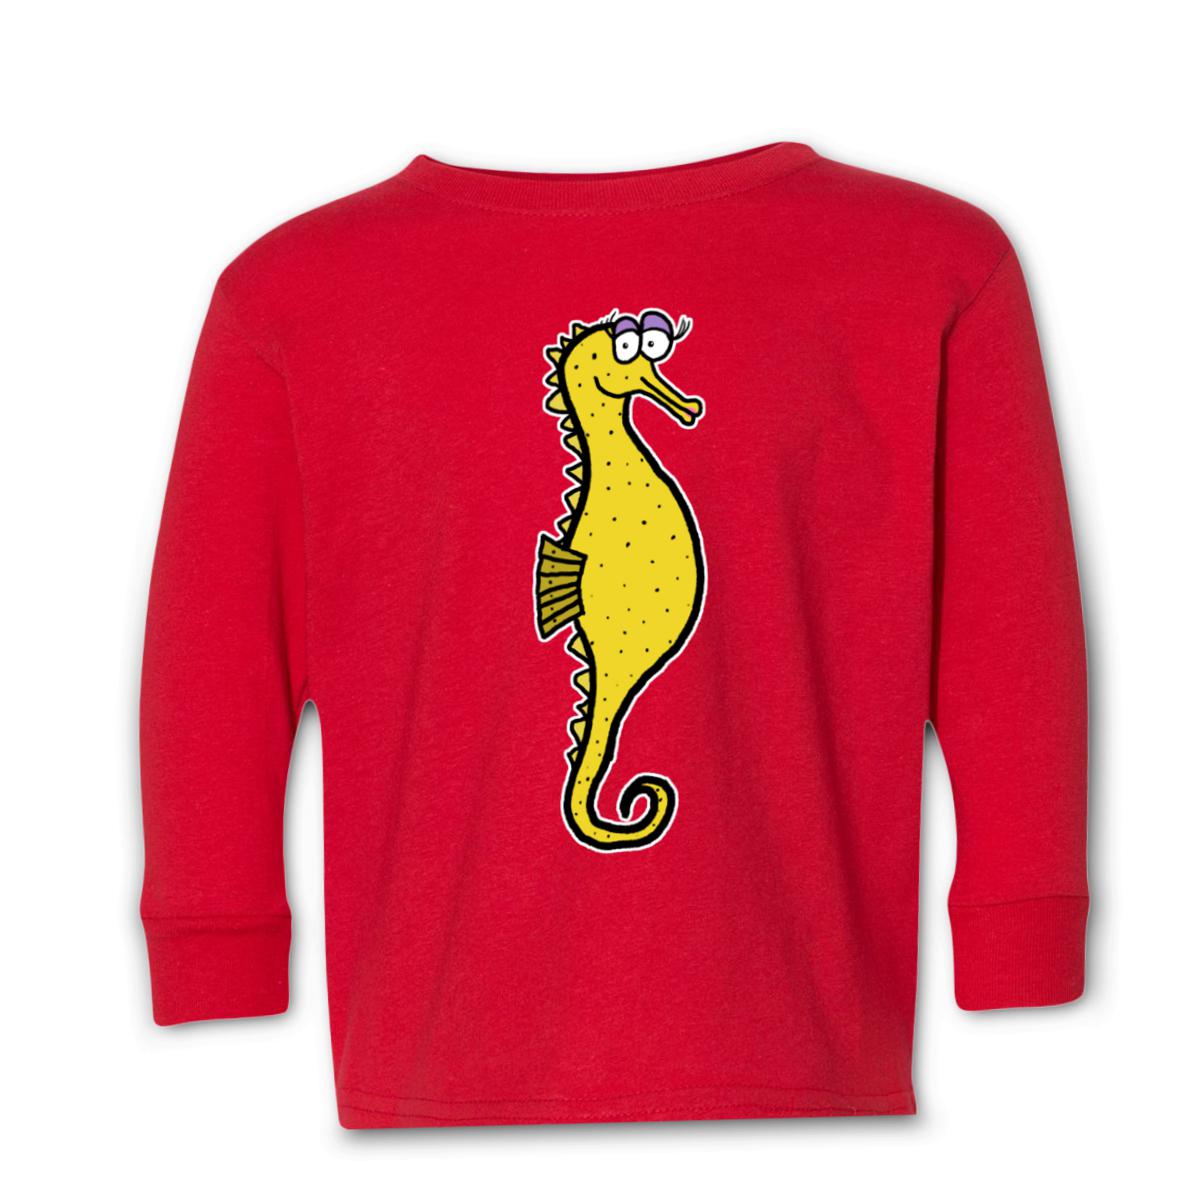 Seahorse Toddler Long Sleeve Tee 56T red